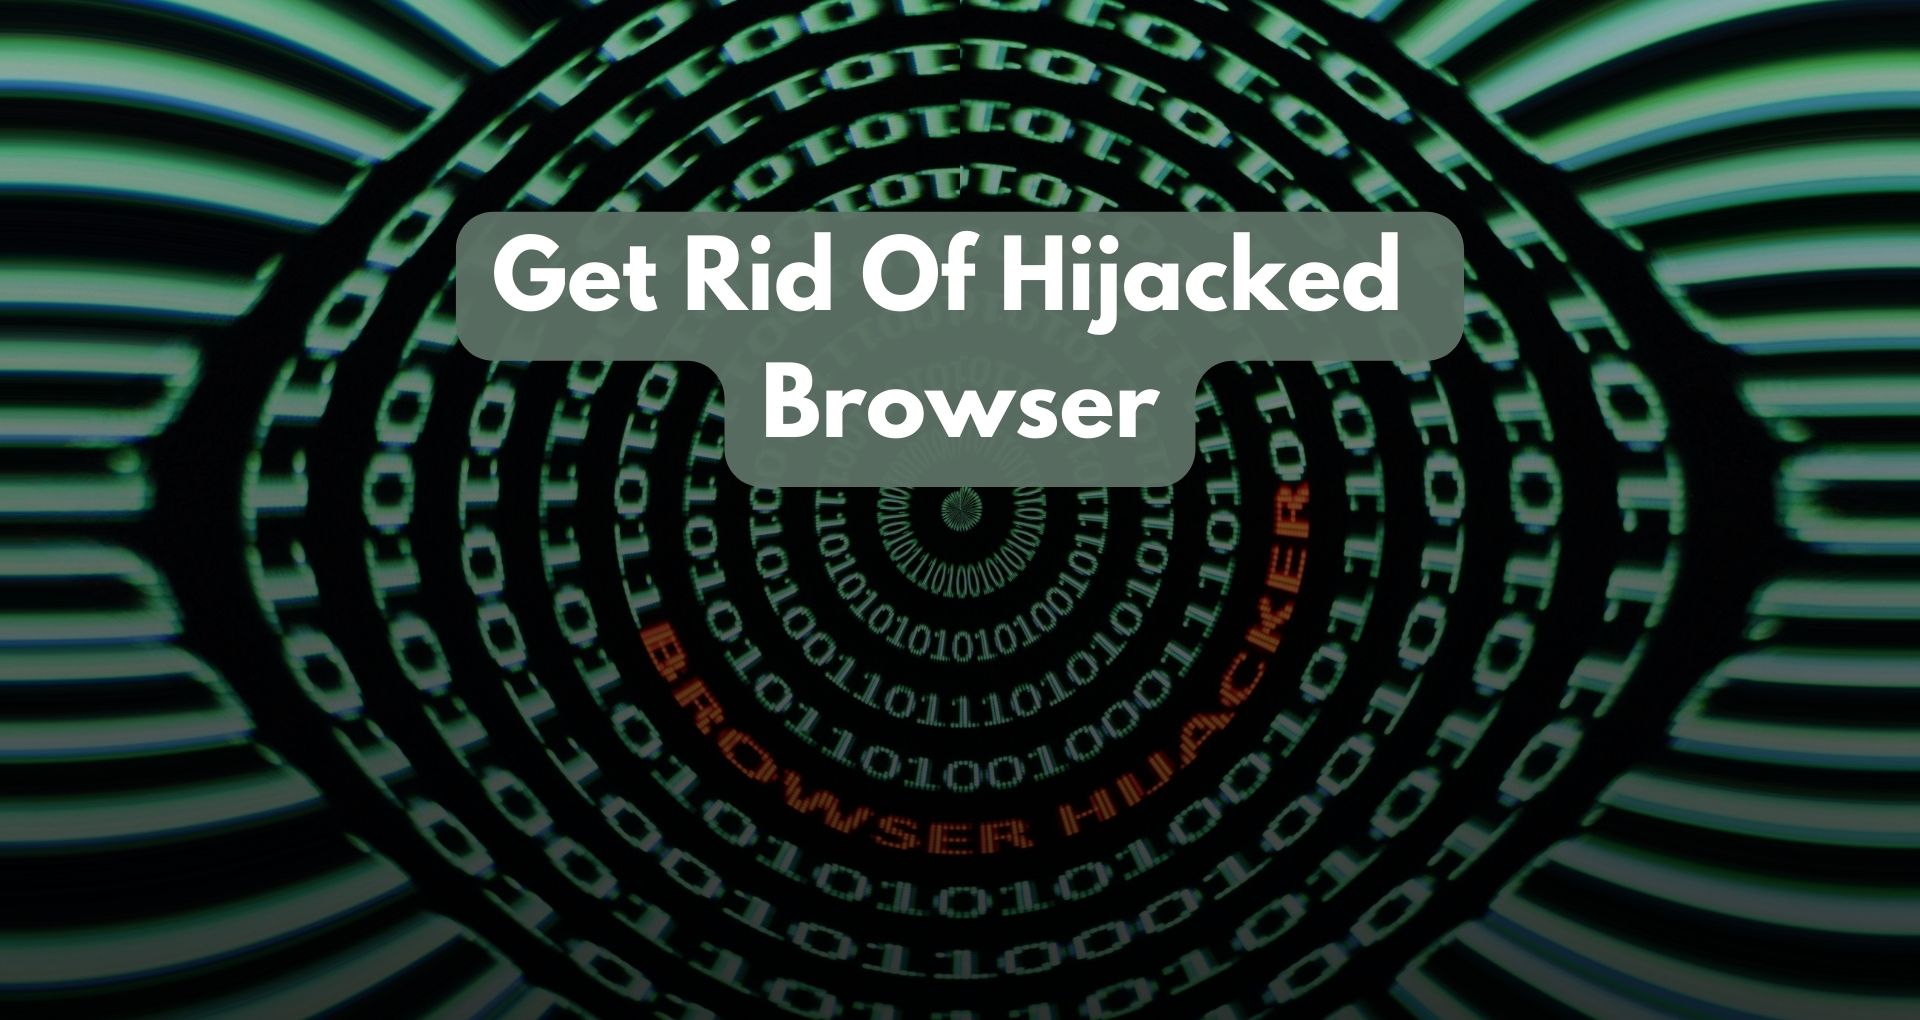 How To Get Rid Of Hijacked Browser?